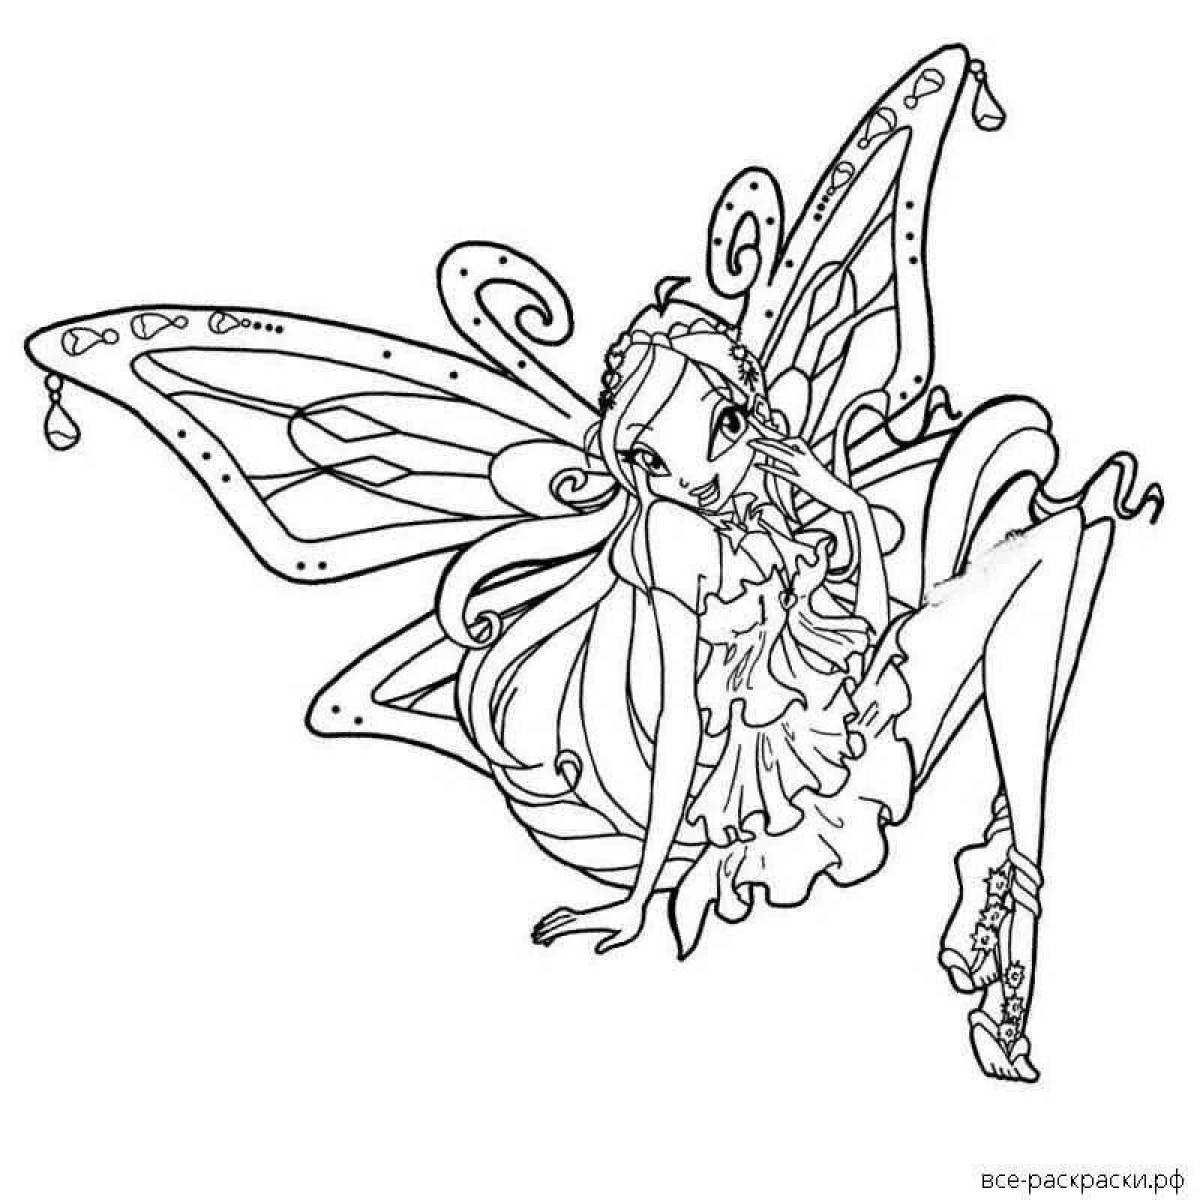 Charming winx coloring page